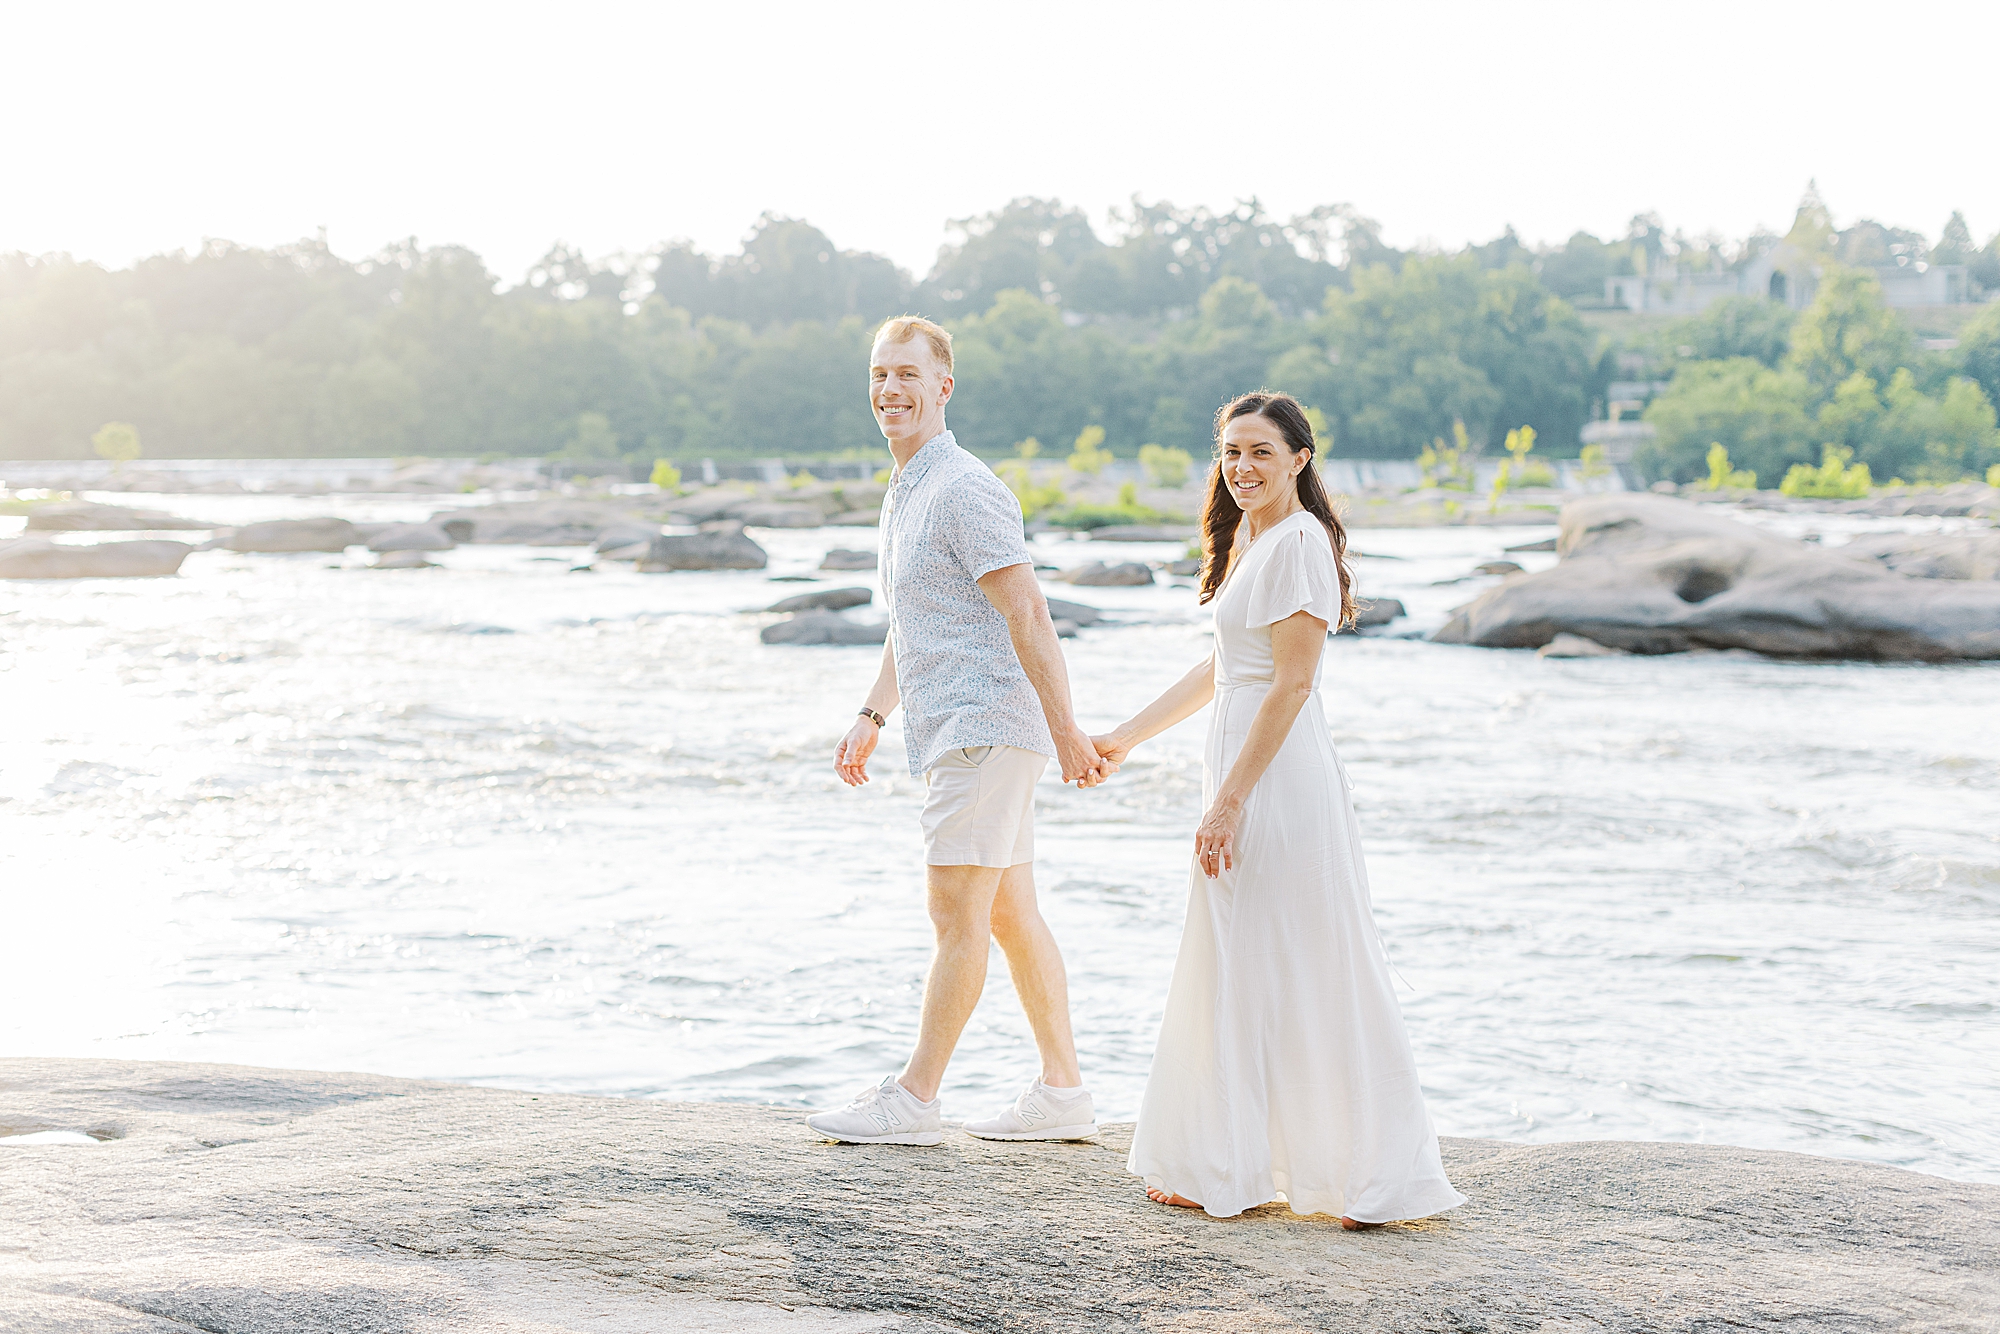 Summer engagement photos at Belle Isle.